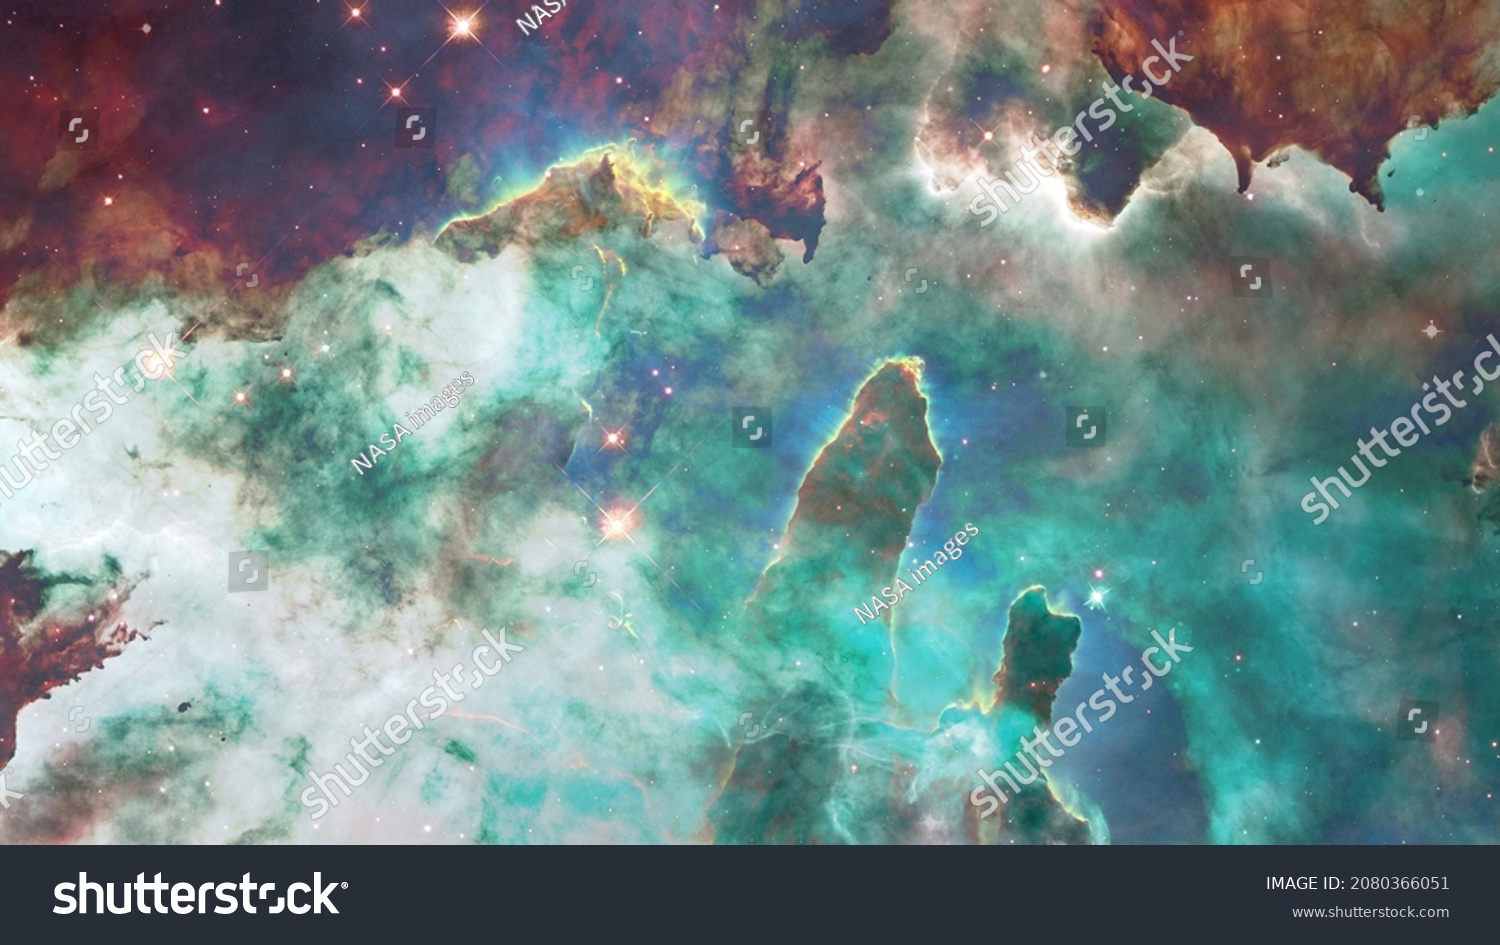 Interstellar. Galaxy background. Elements of this image furnished by NASA. #2080366051